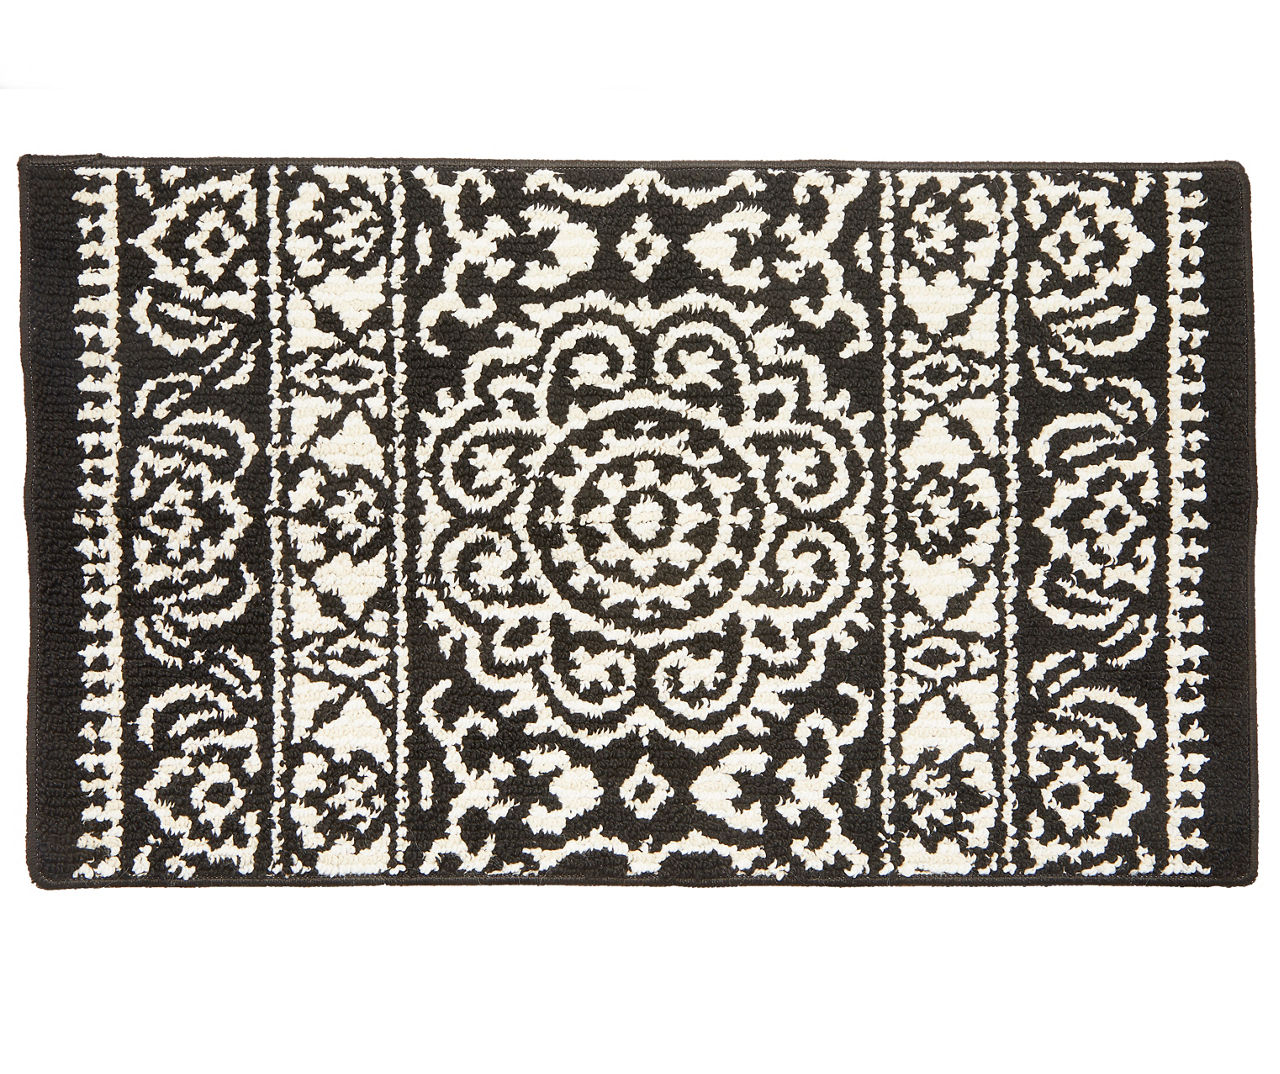 Broyhill Broyhill Black & White Ornate Fascination Accent Rug | Big Lots